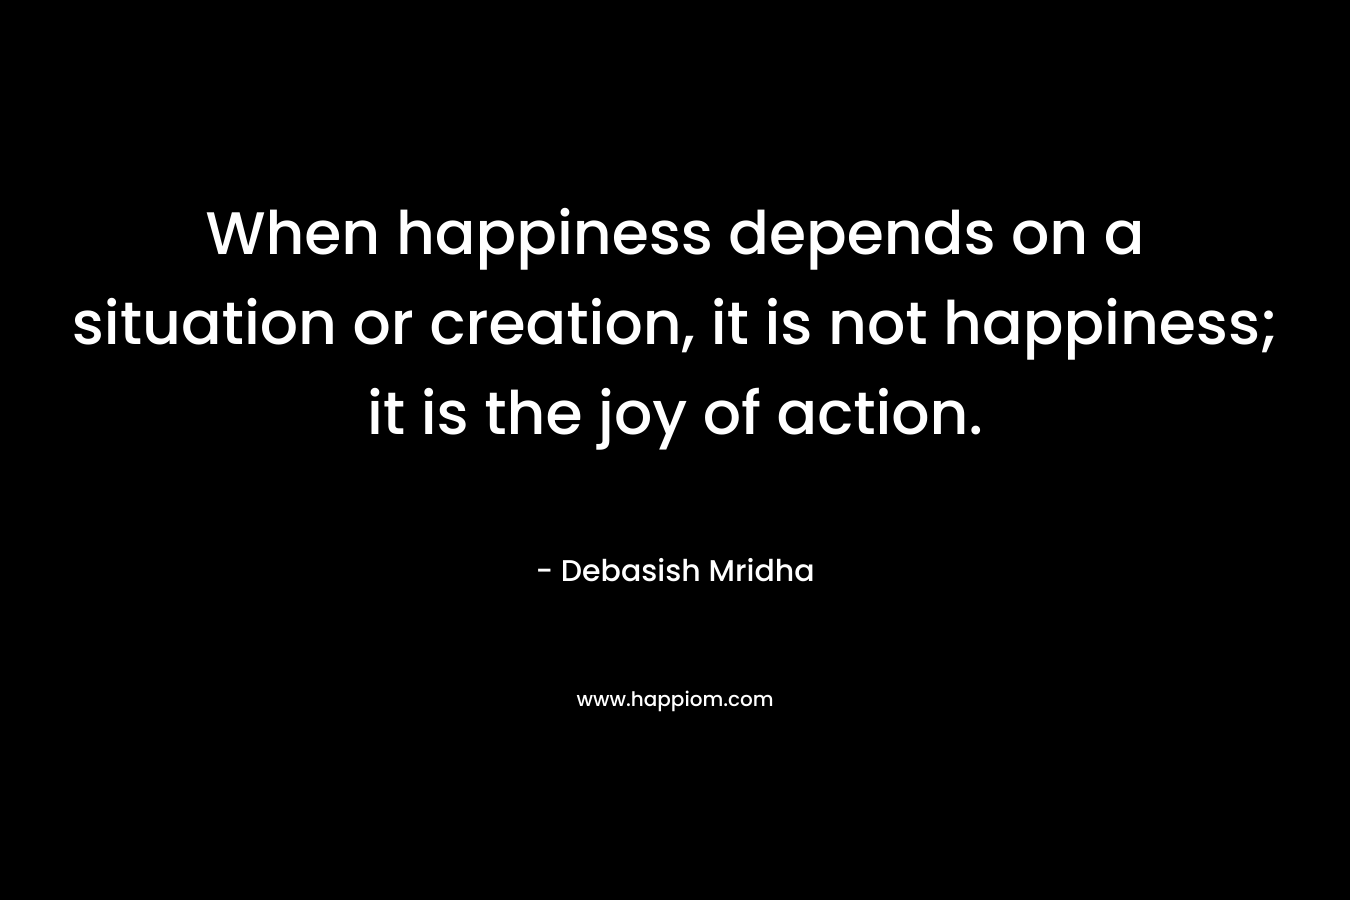 When happiness depends on a situation or creation, it is not happiness; it is the joy of action.